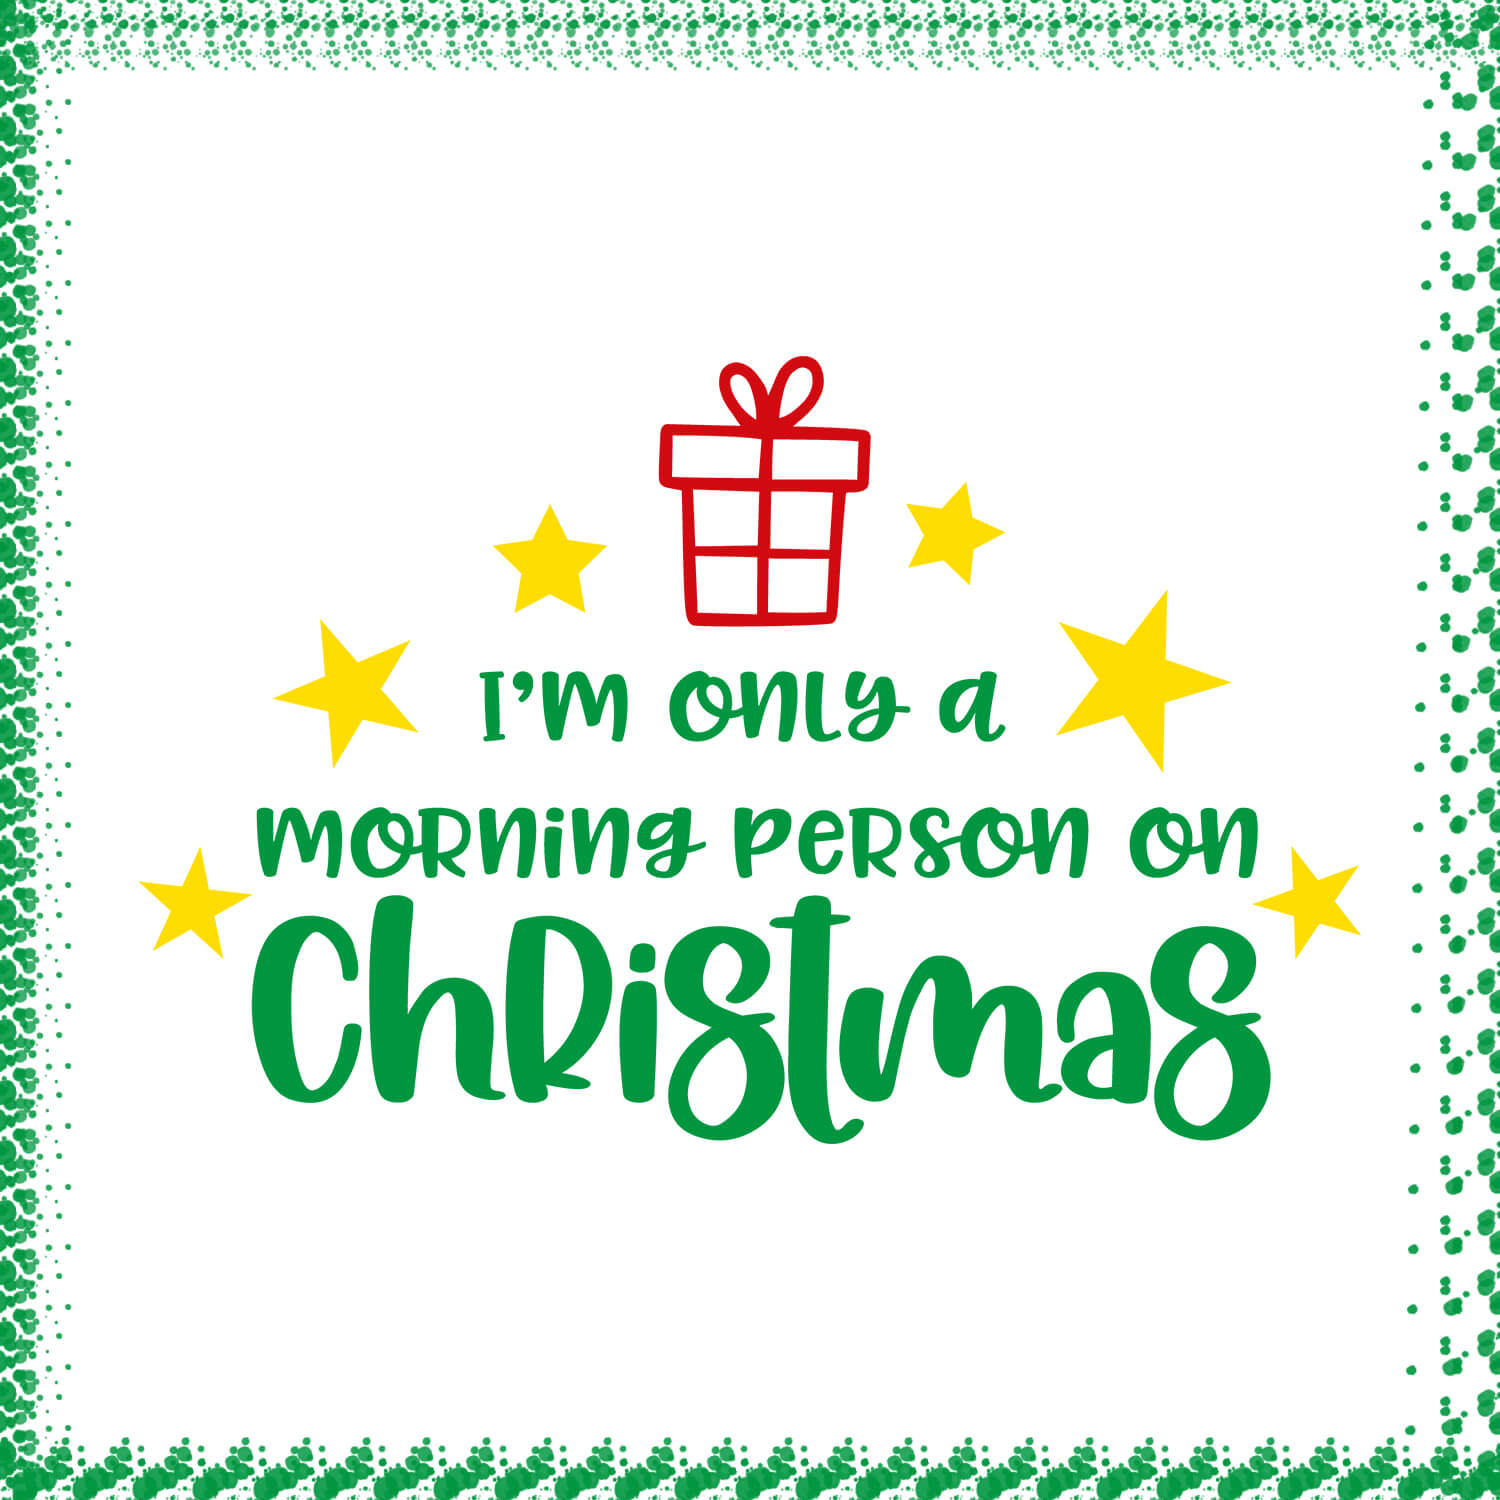 Im only a morning person on Christmas free SVG files cover image.